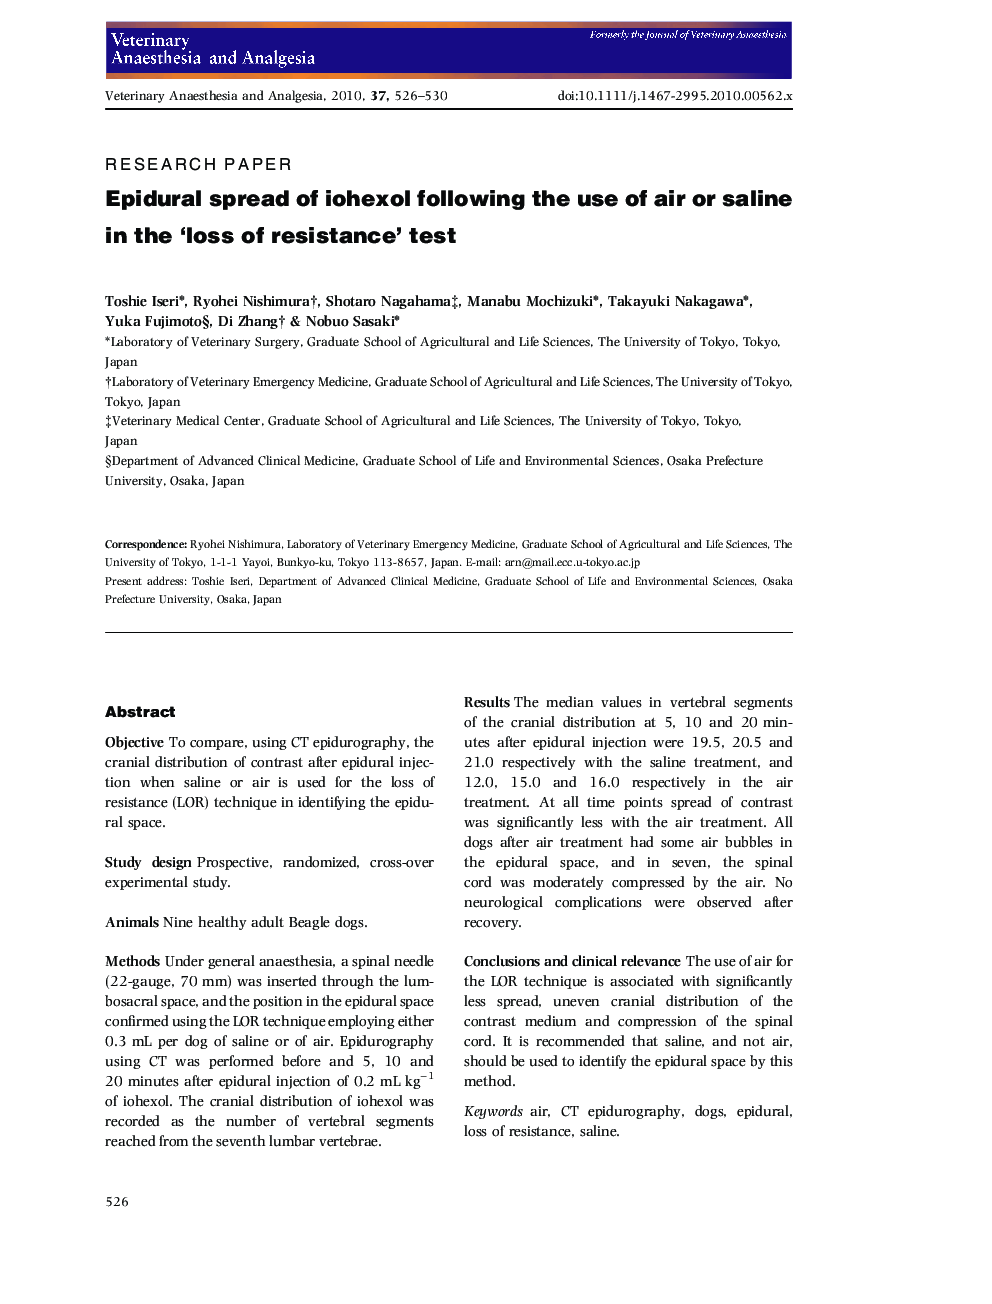 Epidural spread of iohexol following the use of air or saline in the 'loss of resistance' test